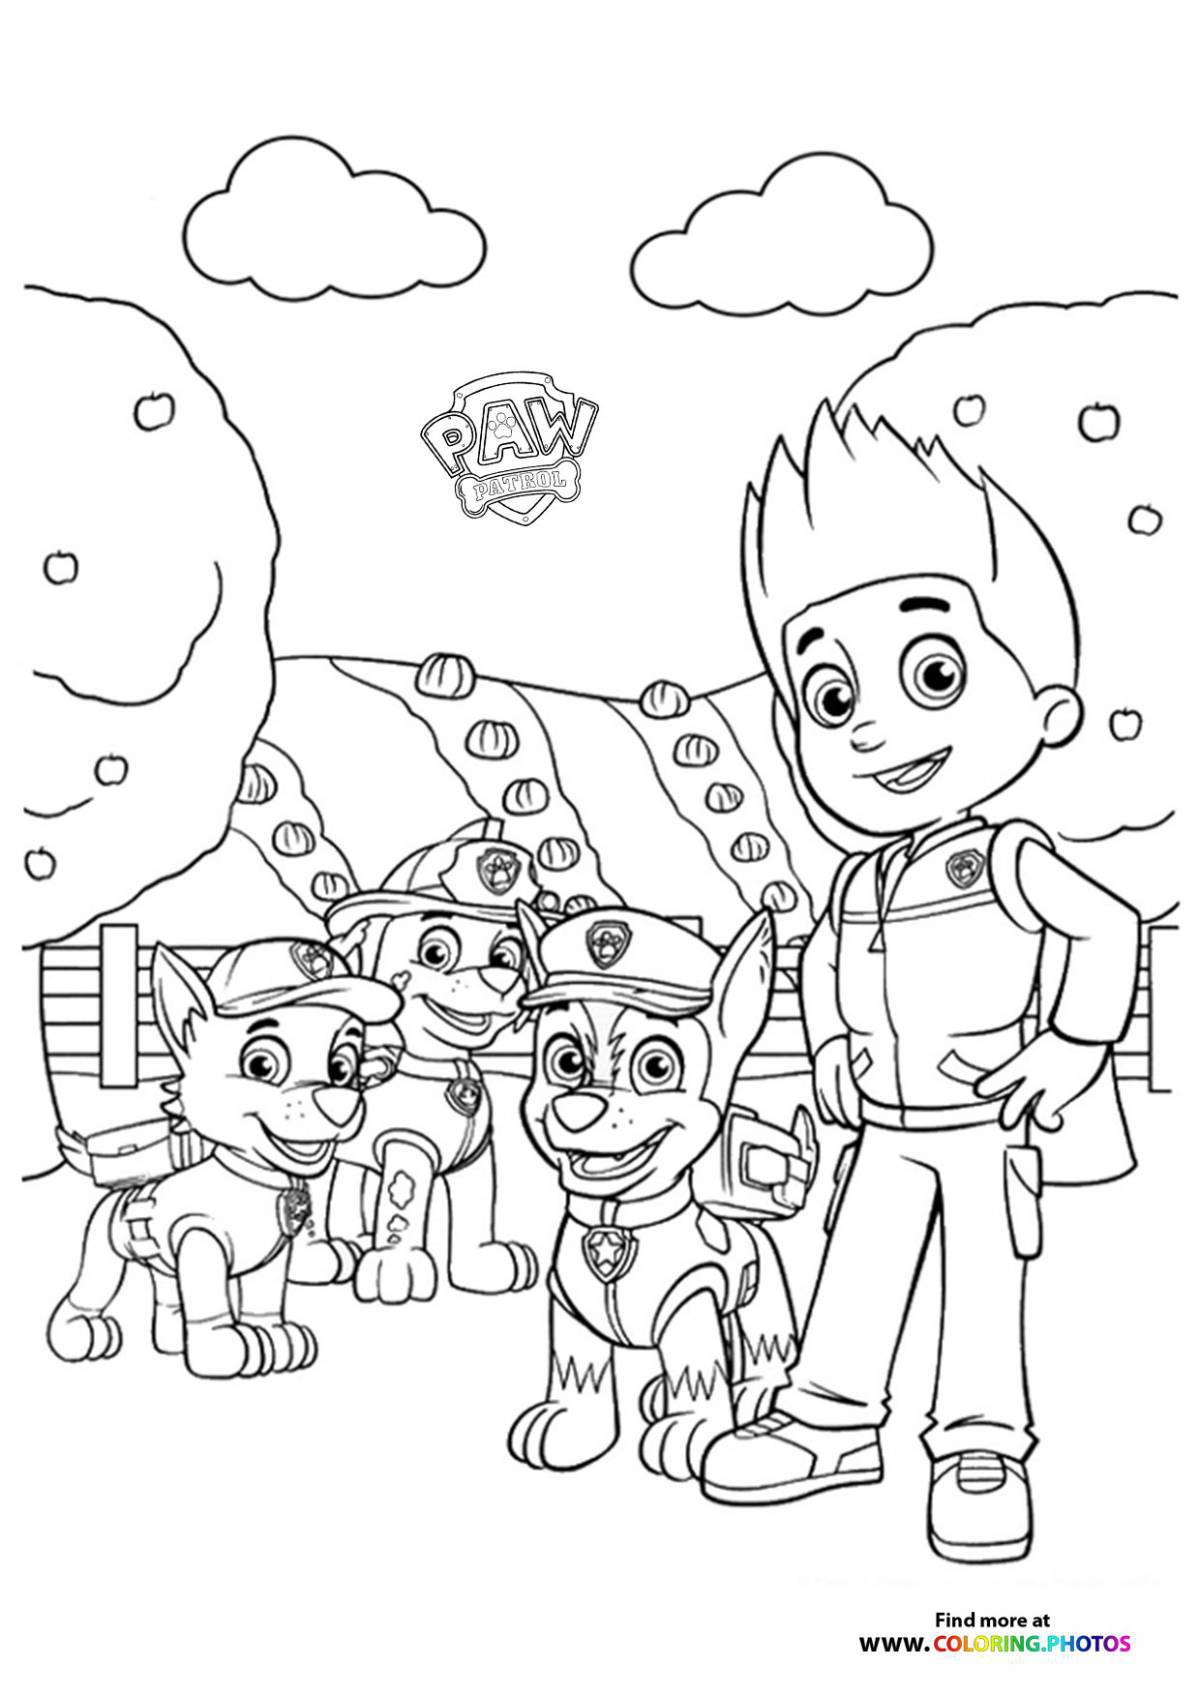 Bold coloring page paw patrol rider